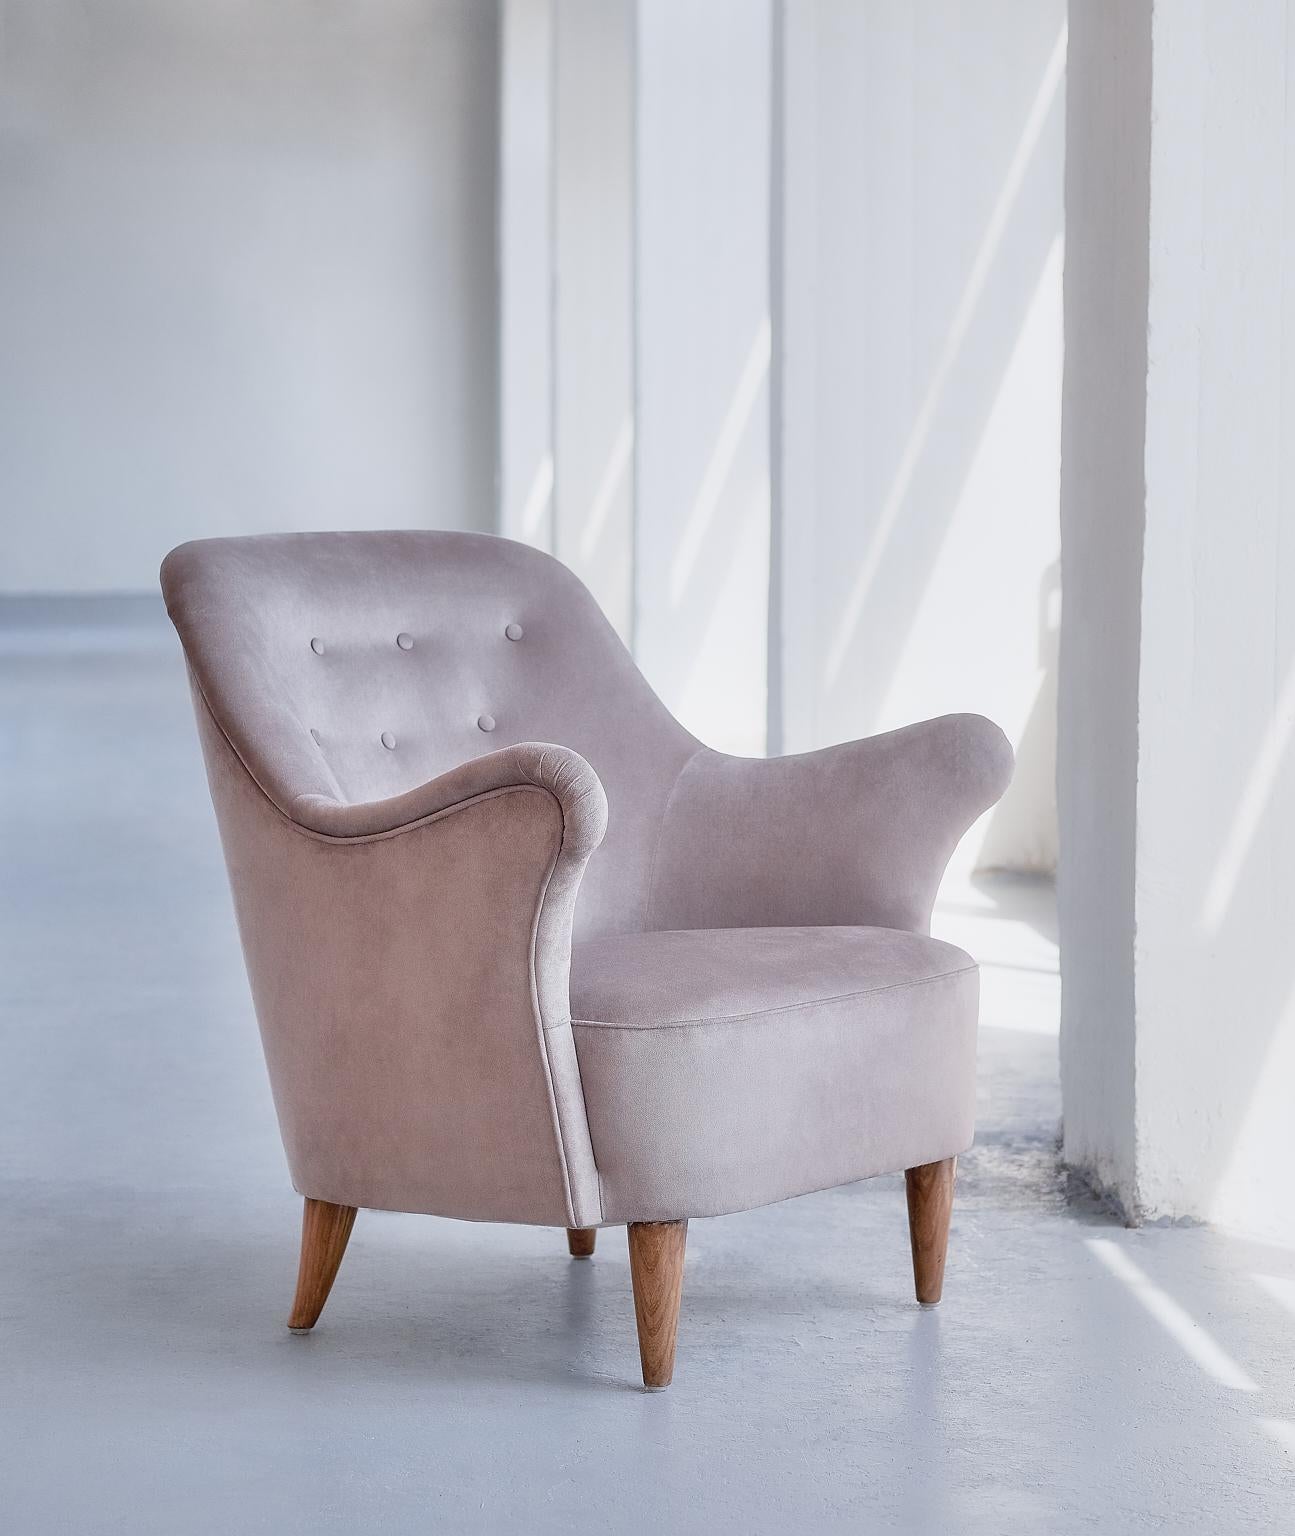 This rare armchair was produced by AB Elsa Gullberg in the late 1930s. The organically shaped arms of the chair and the carved, tapered legs give the chair a sculptural and modern feel. The chair is upholstered in a taupe/grayish velvet fabric, the